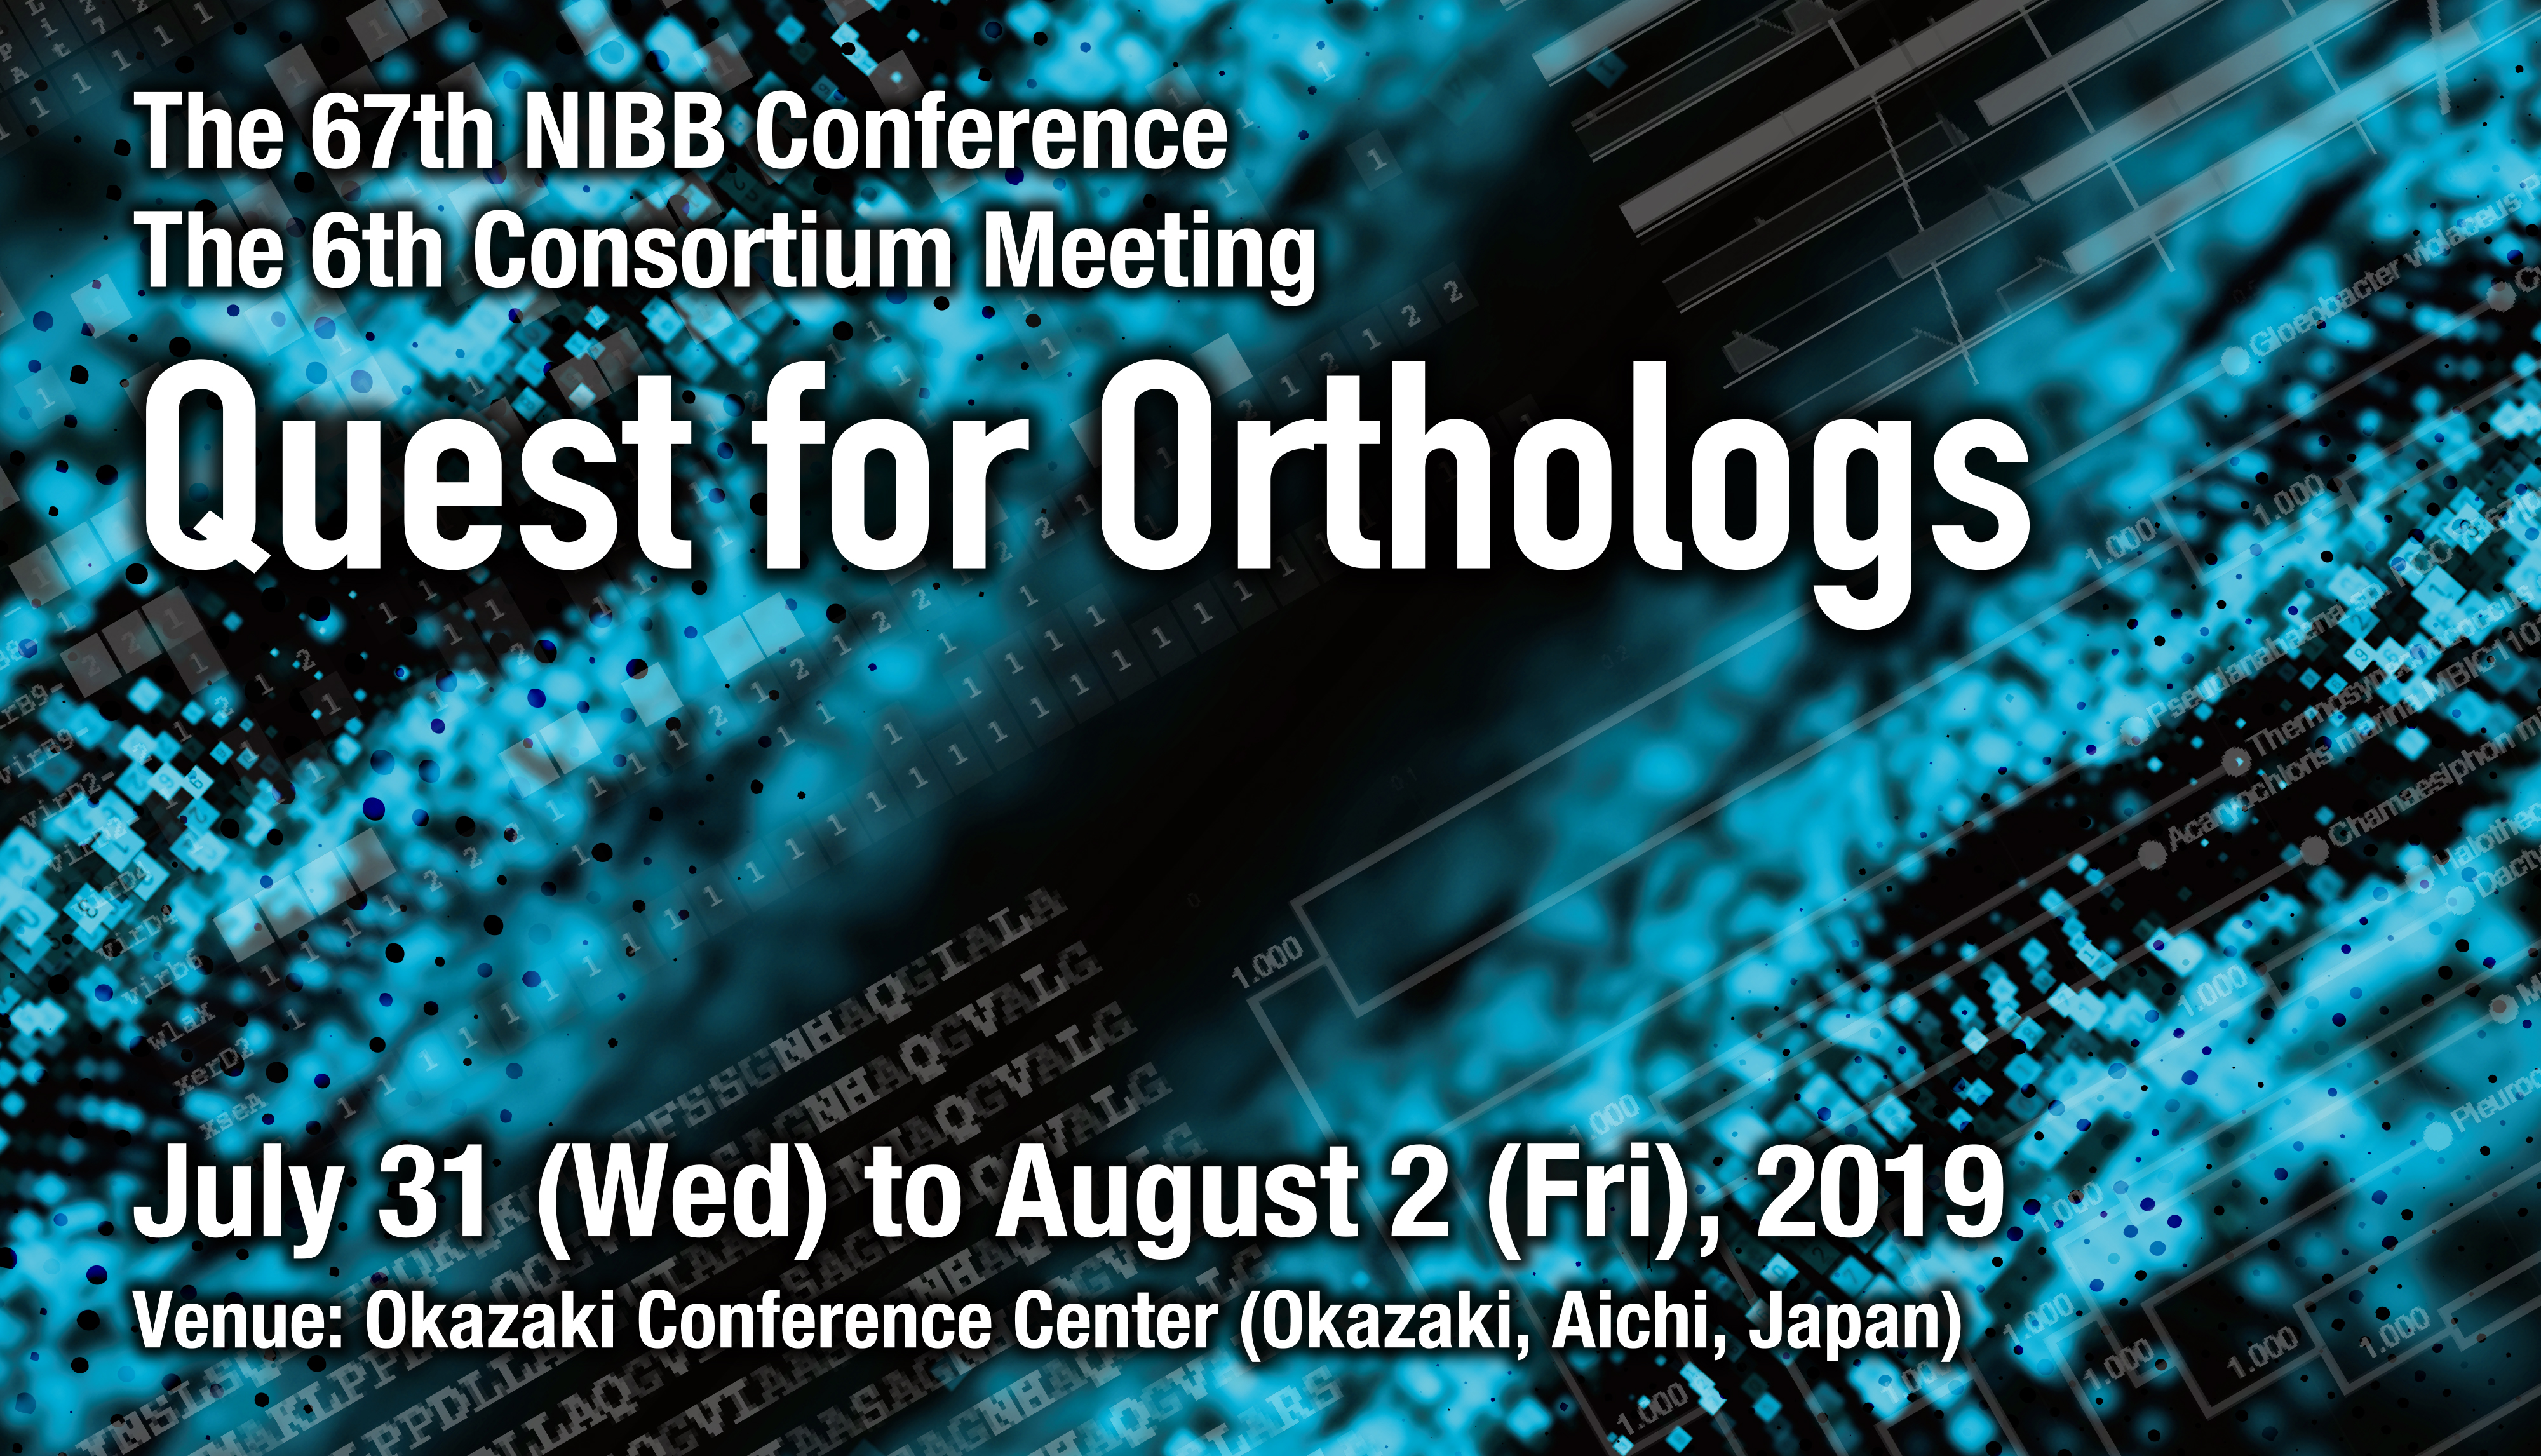 The 67th NIBB Conference / The 6th Quest for Orthologs Meeting